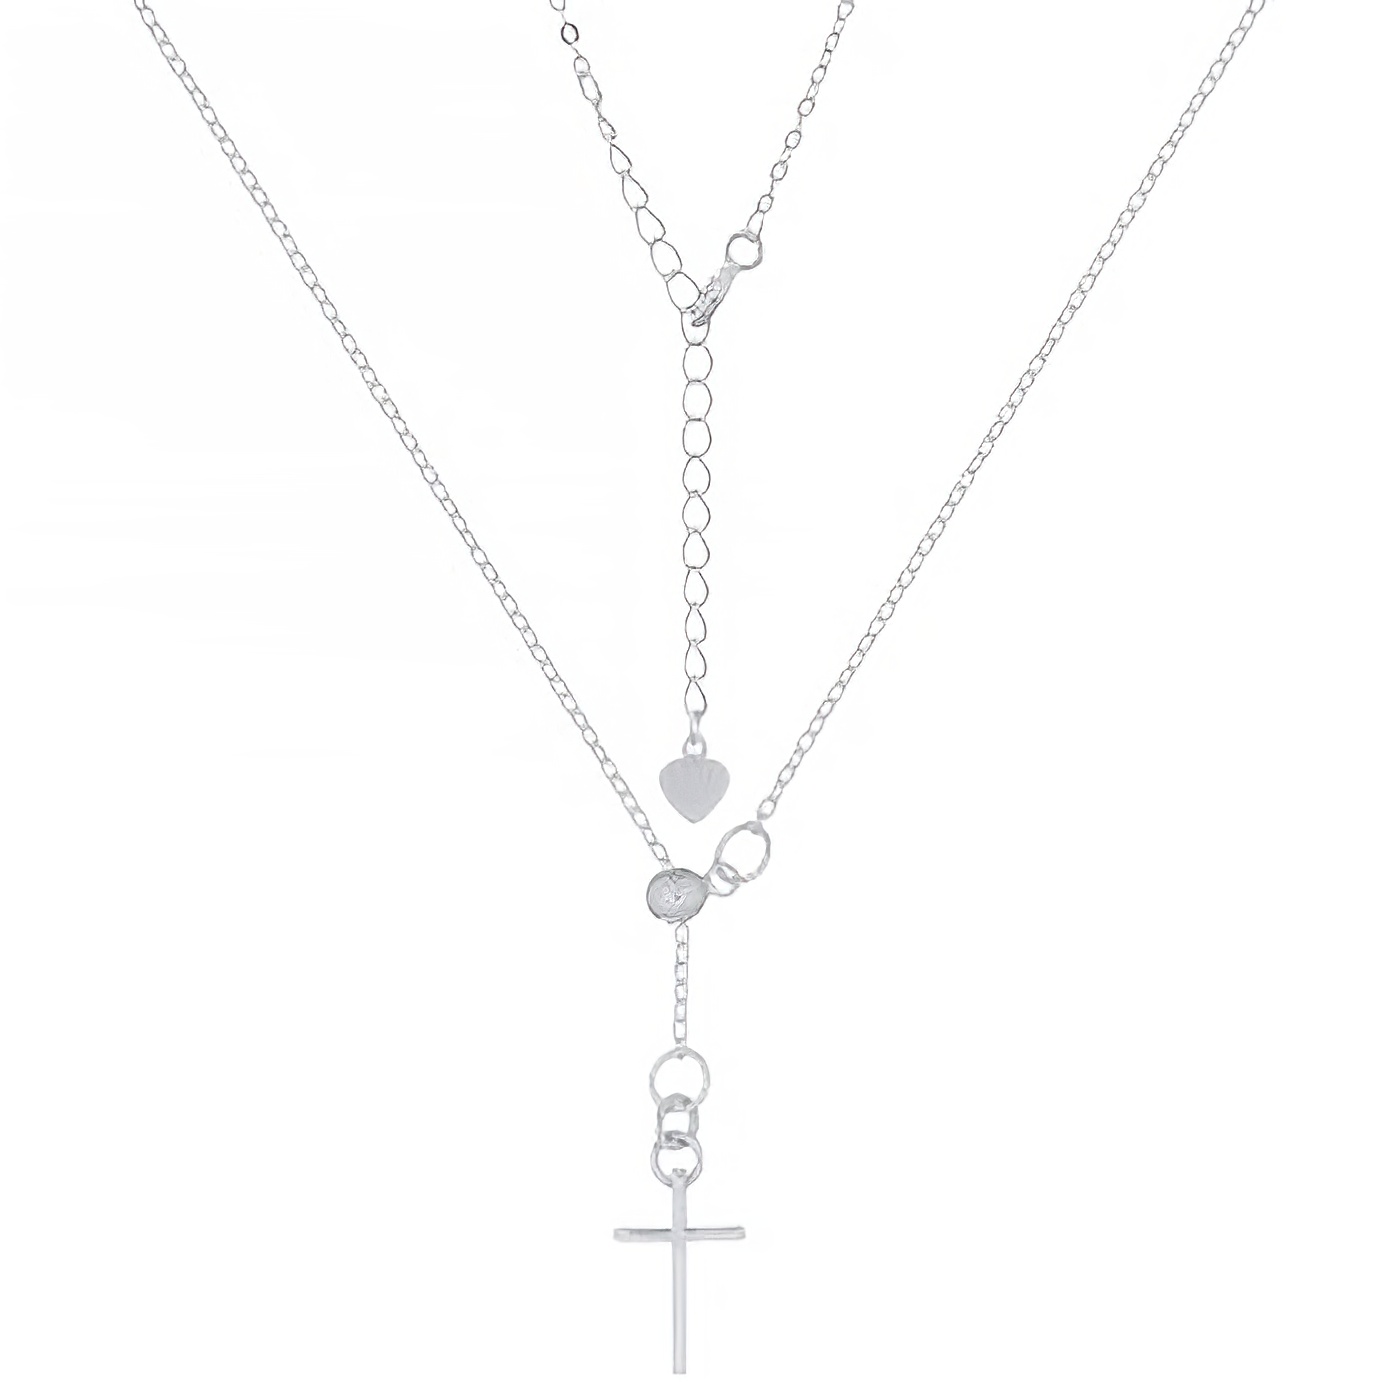 Cross Latin Adjustable Design Silver Plated 925 Chain Necklace by BeYindi 